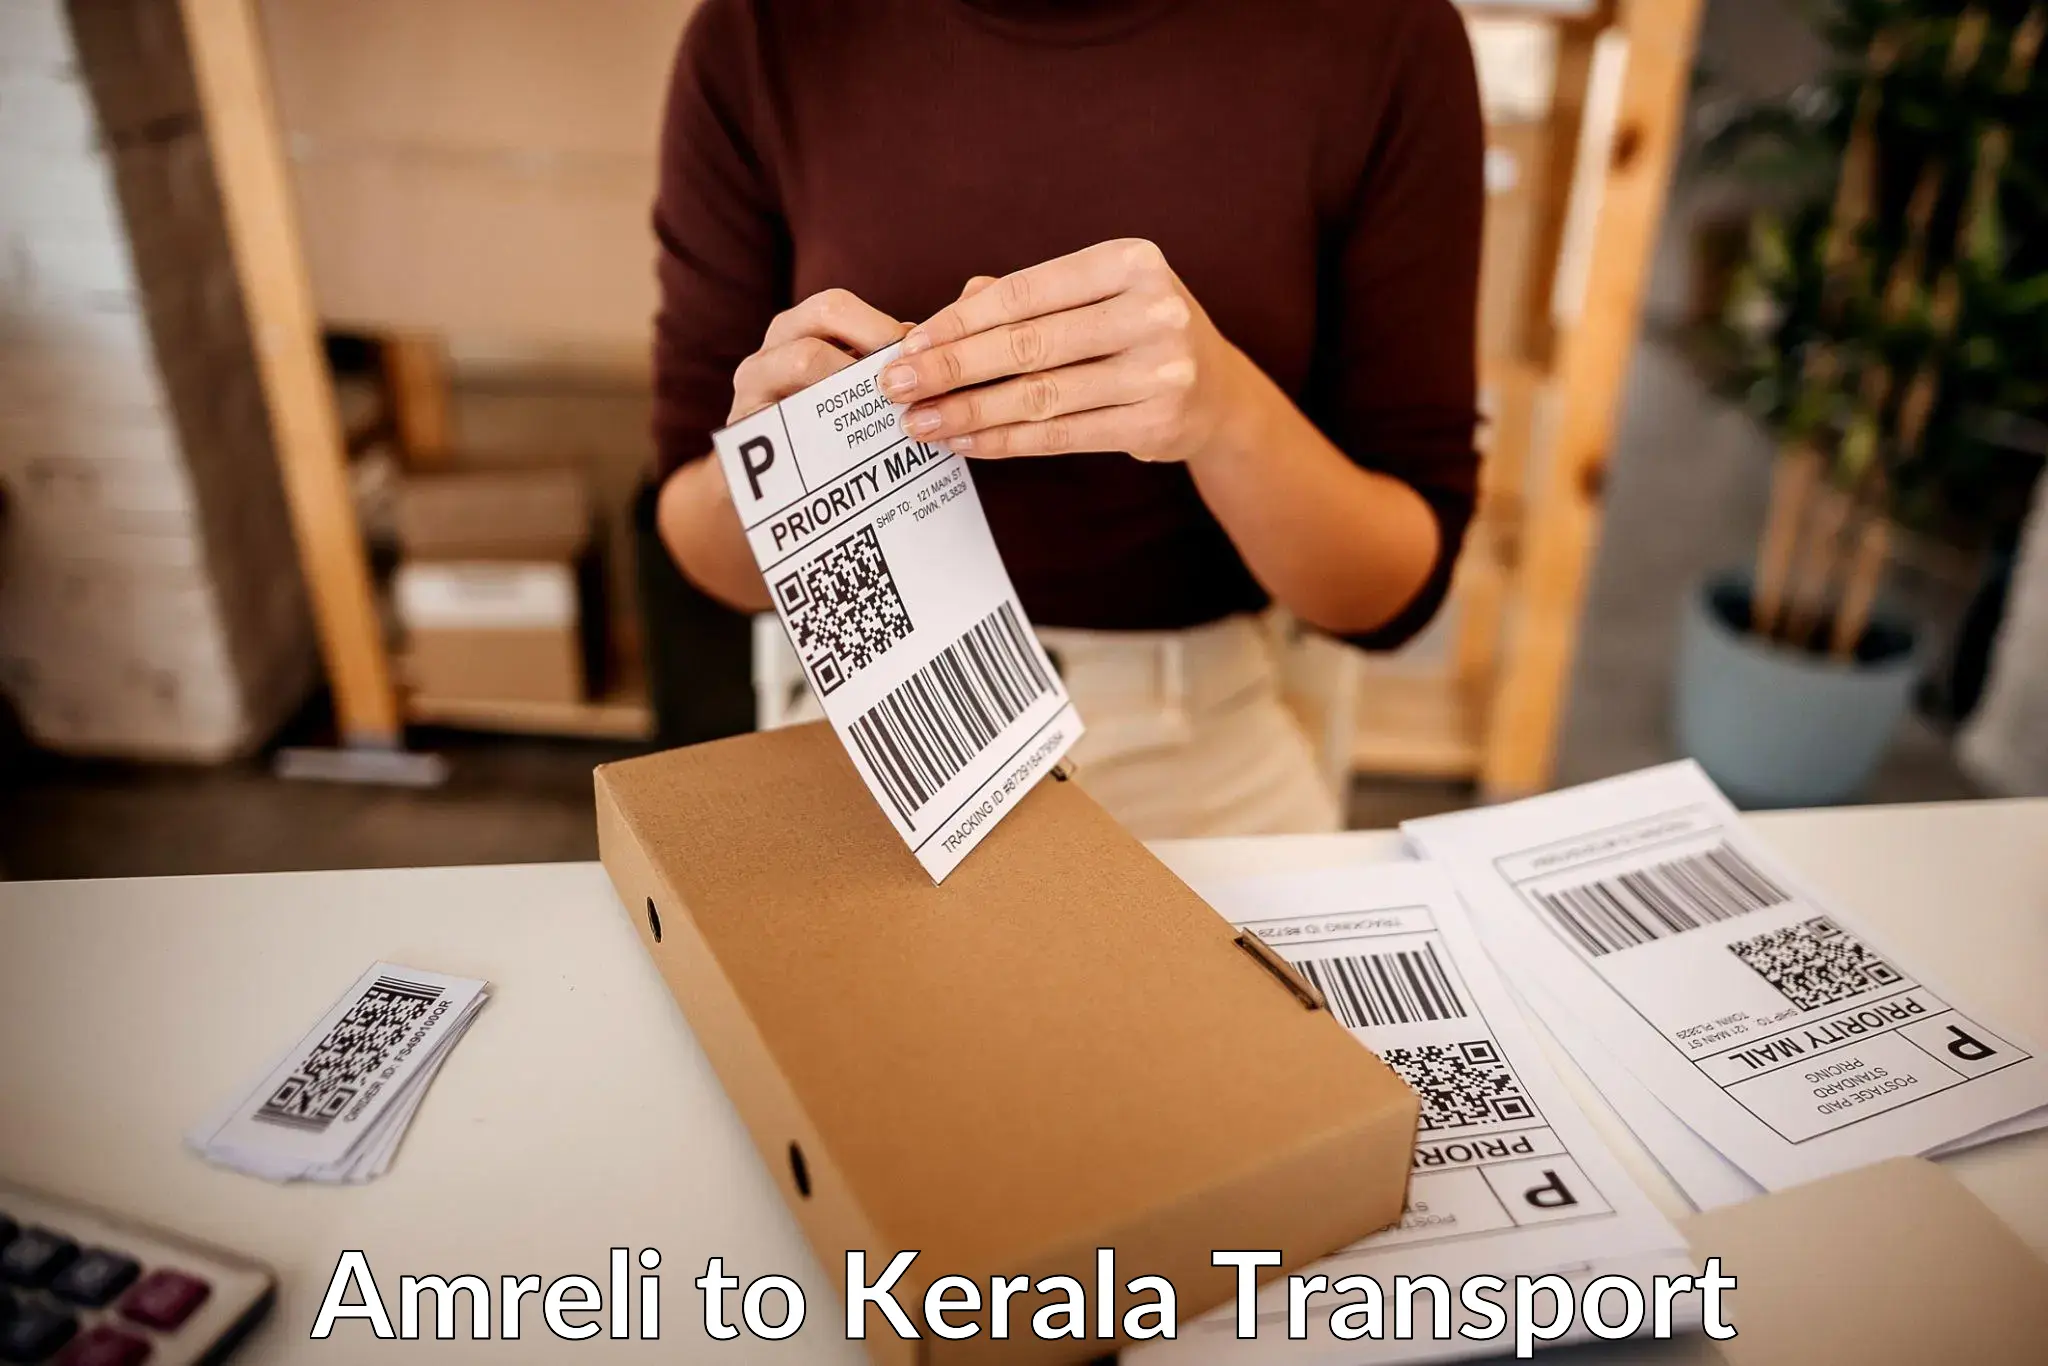 Goods delivery service Amreli to Parippally